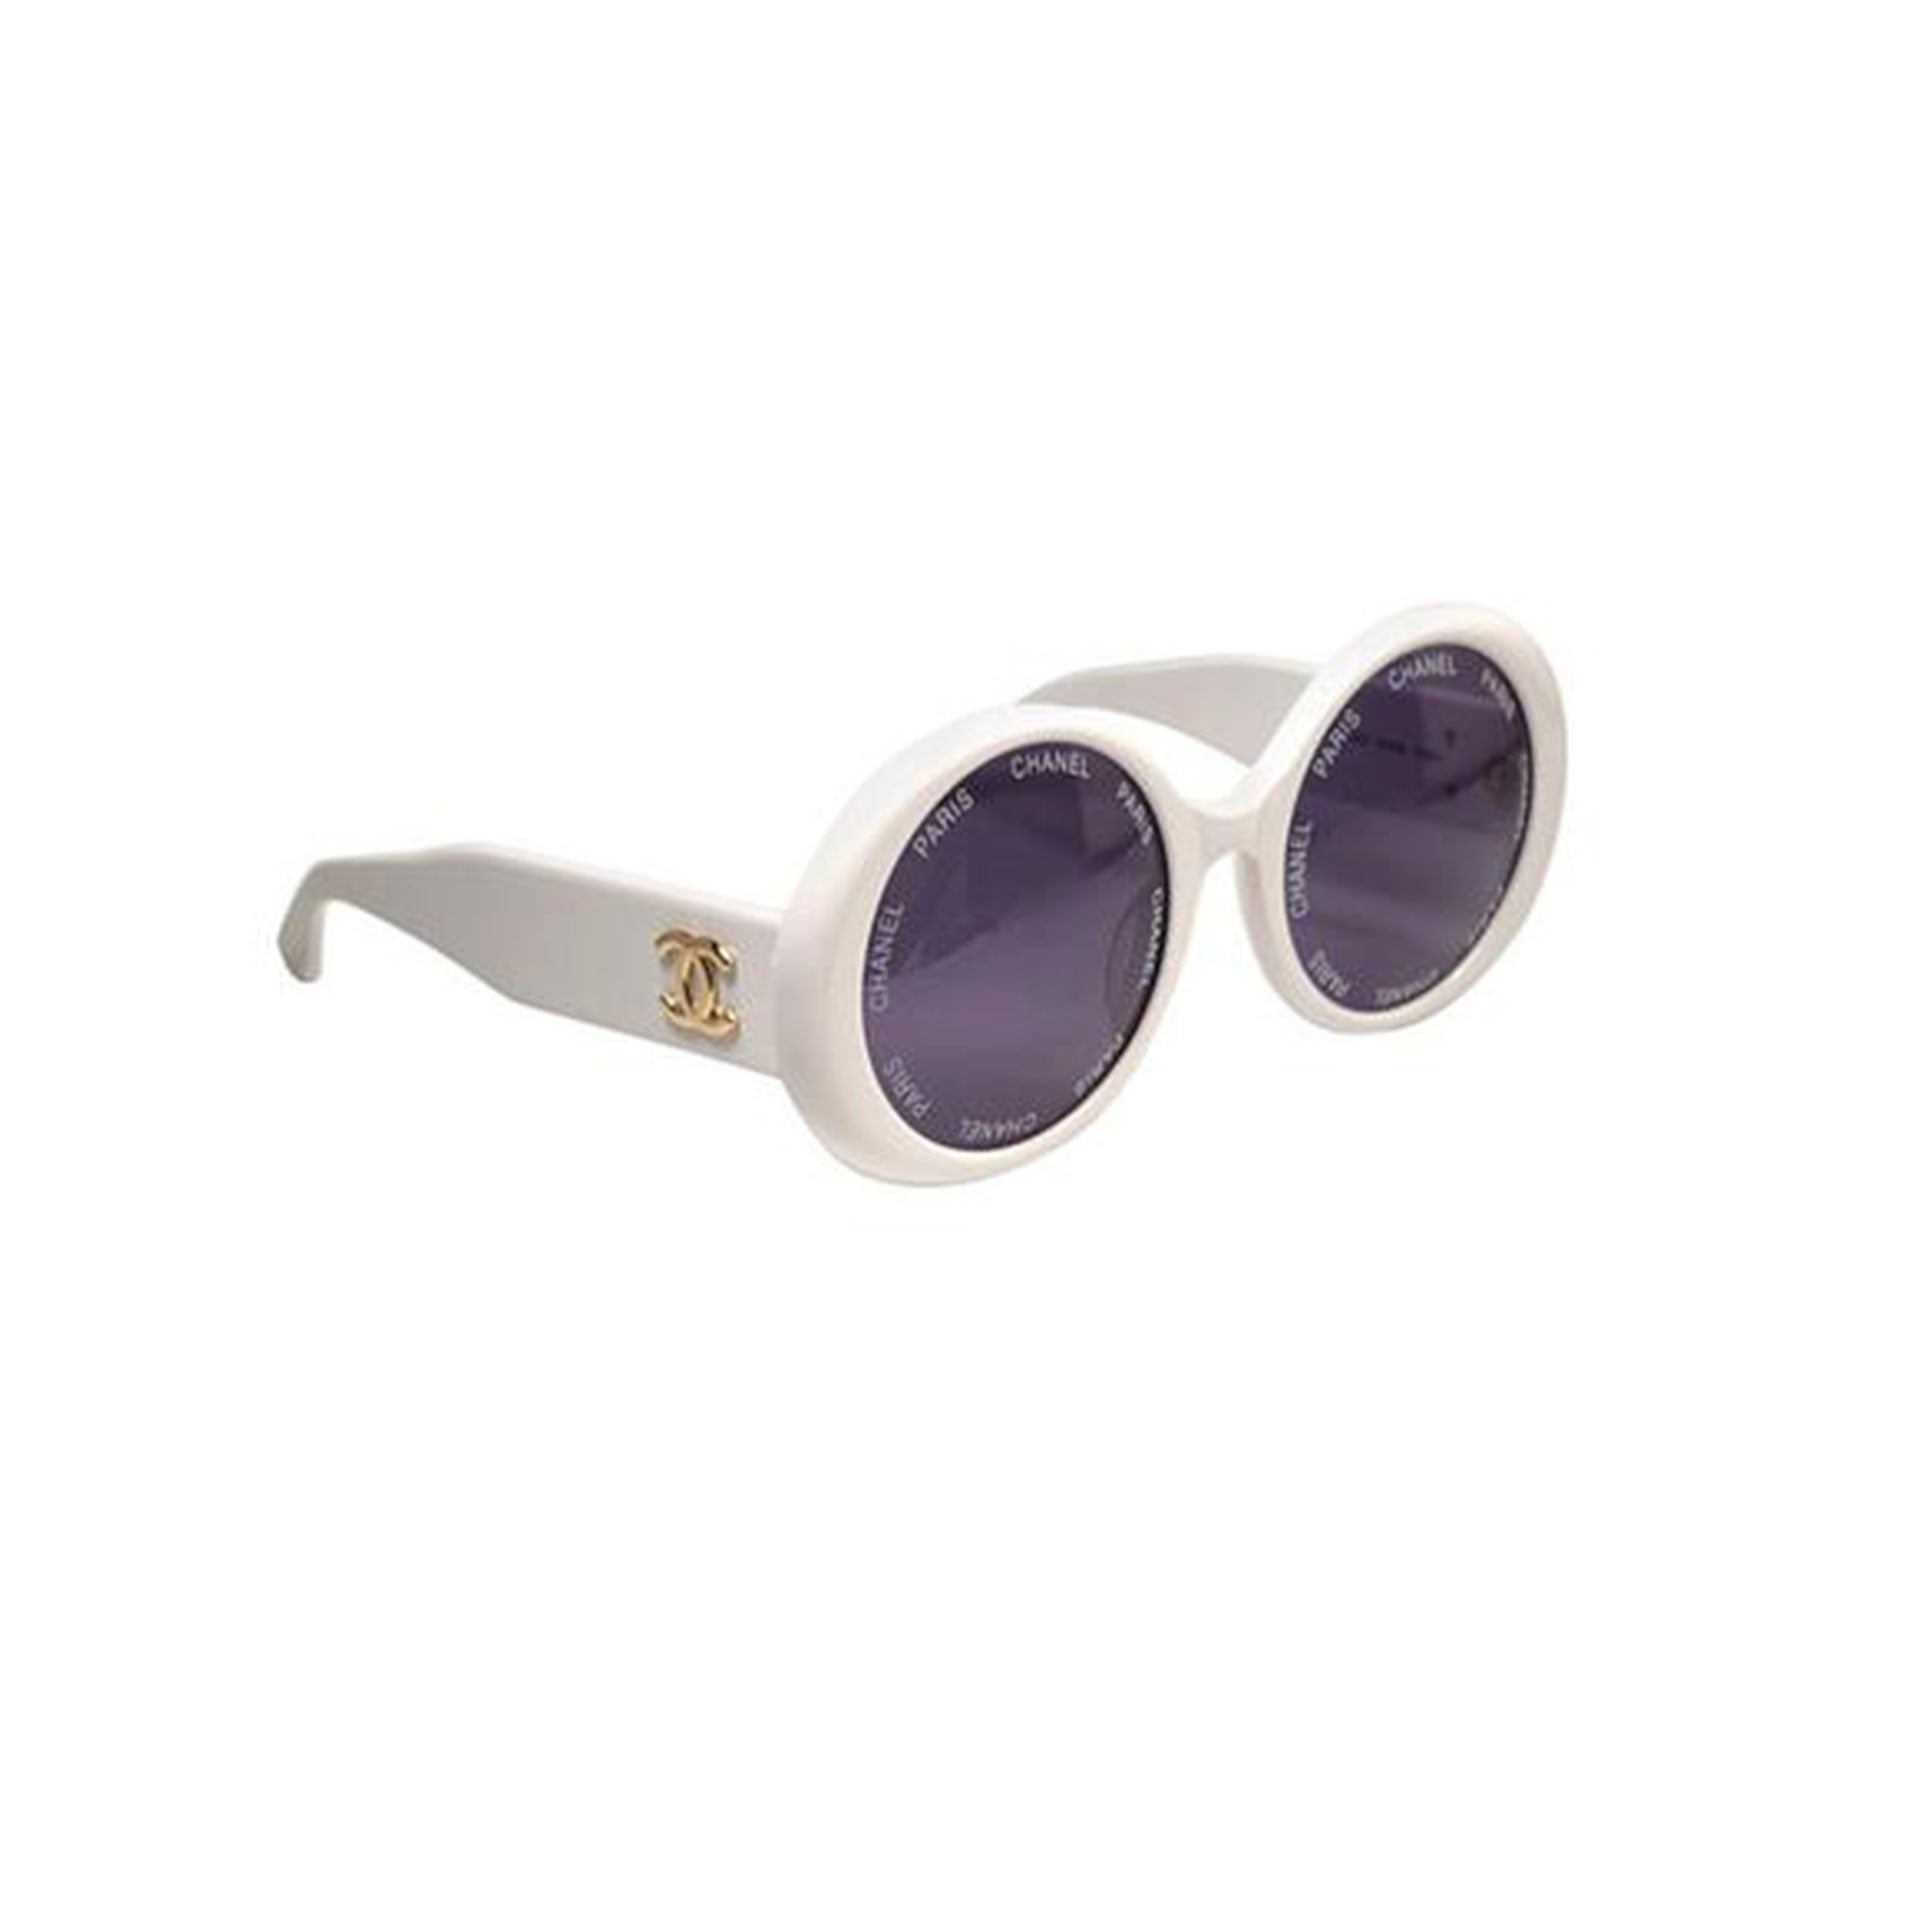 CHANEL 90s RIMLESS CLEAR SUNGLASSES